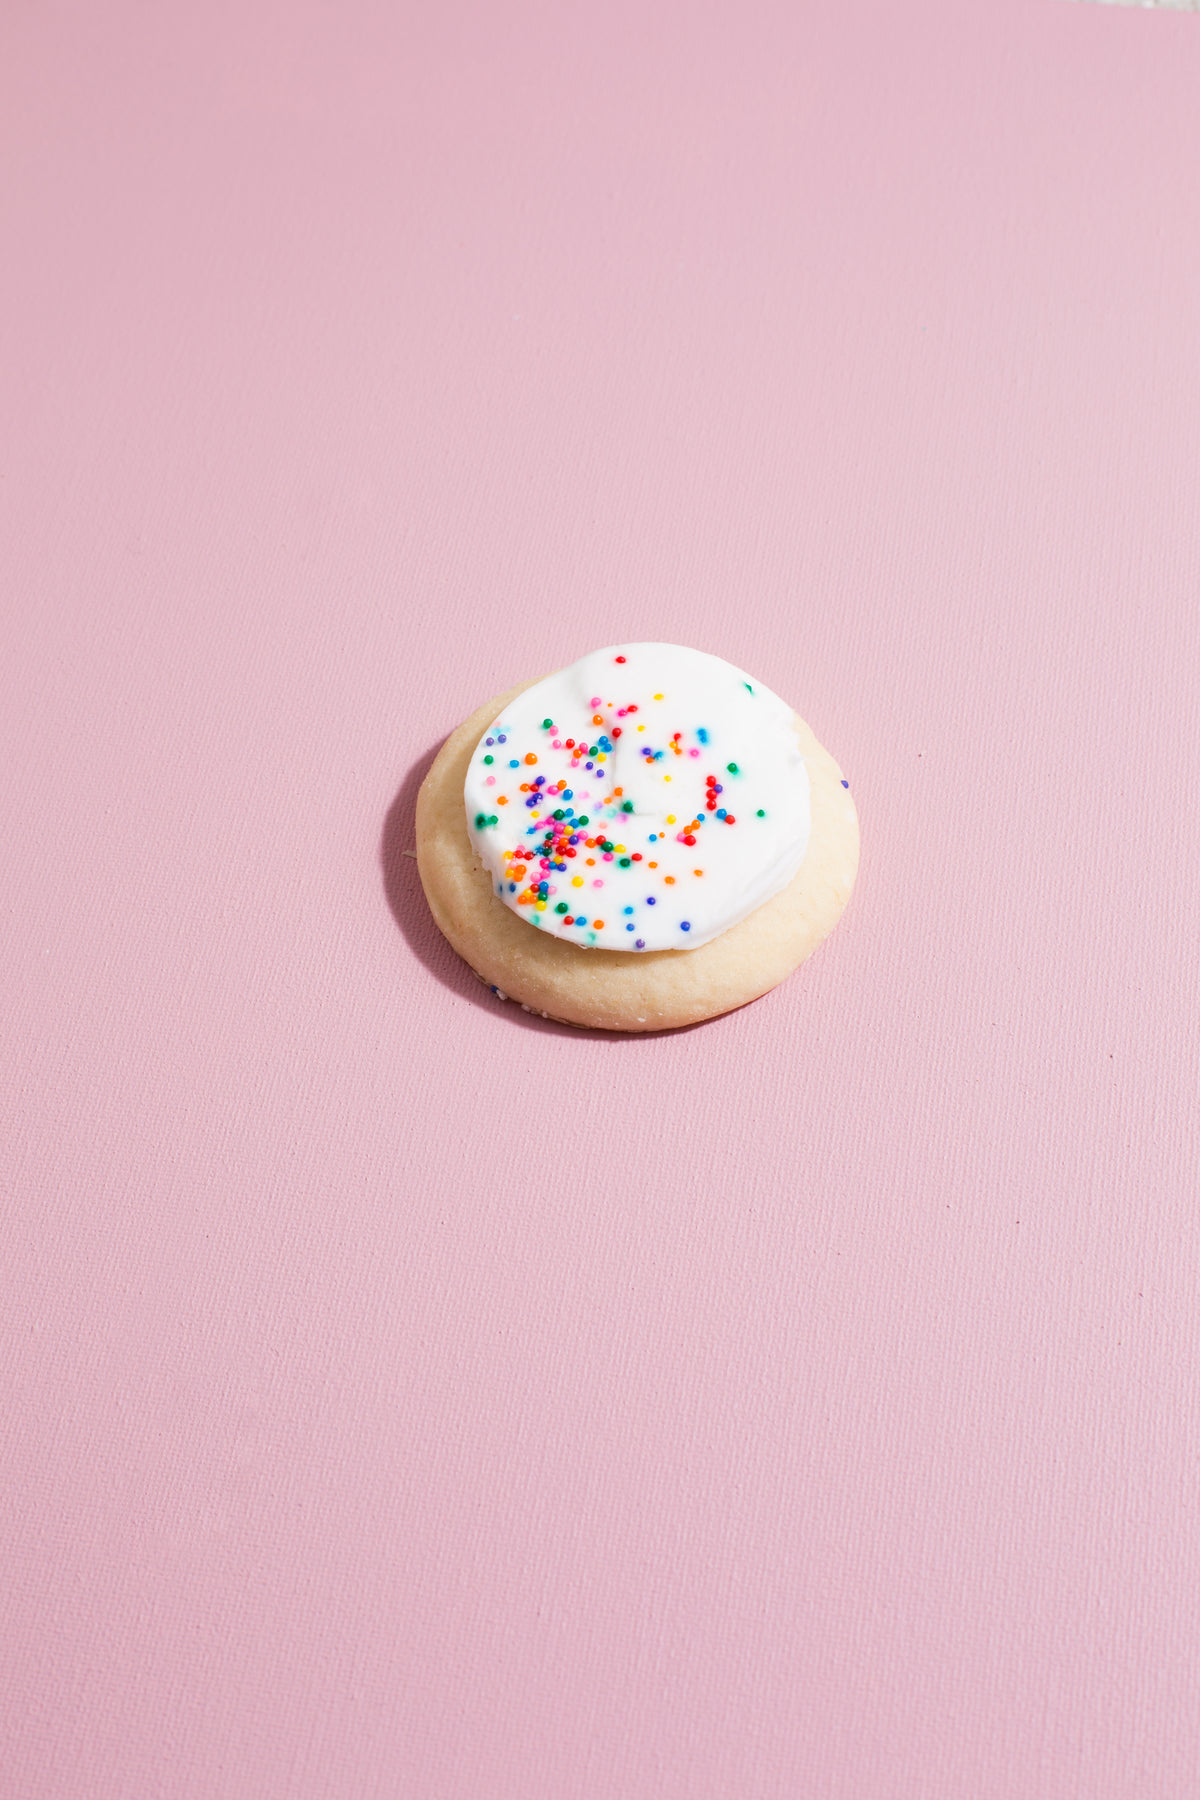 single cookie on pink